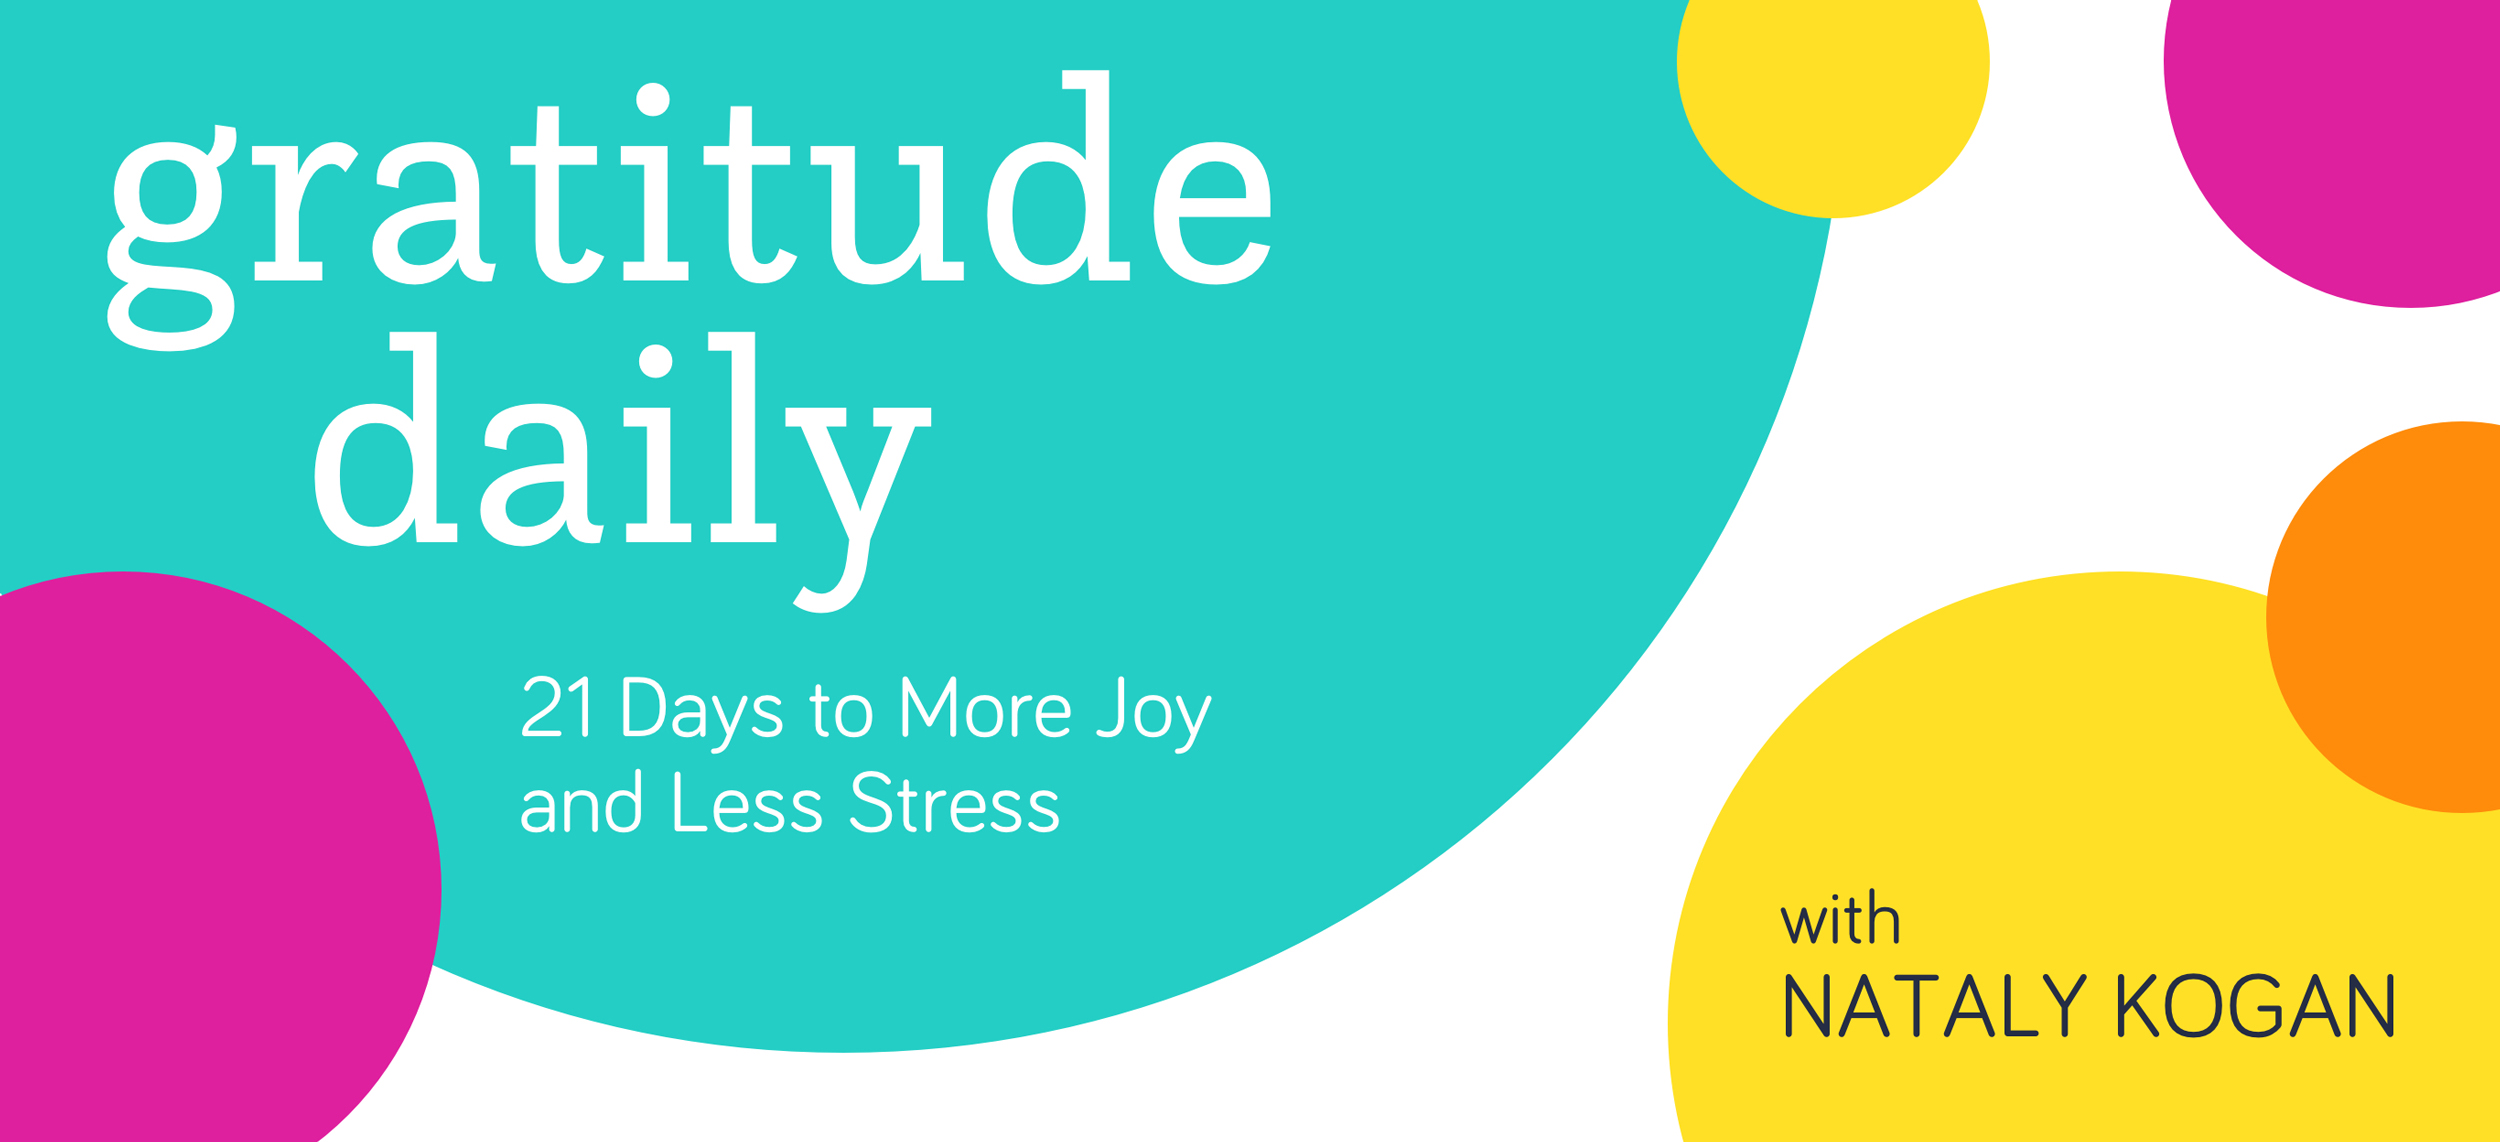 Gratitude Daily: 21 Days to More Joy and Less Stress with Nataly Kogan